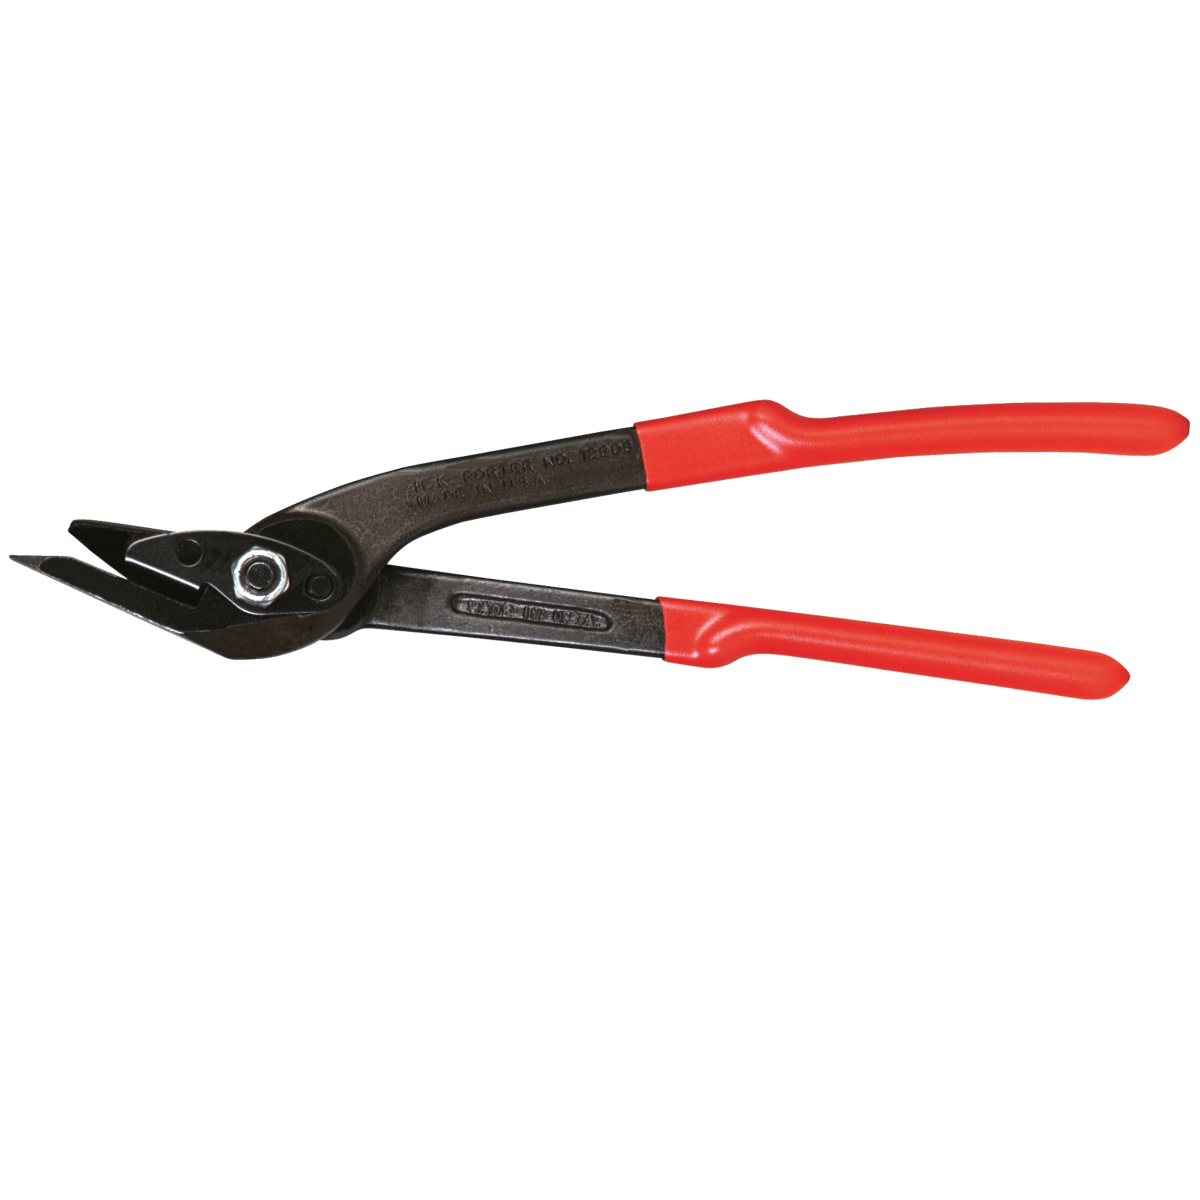 H. K. Porter 12" Steel Strapping Cutter